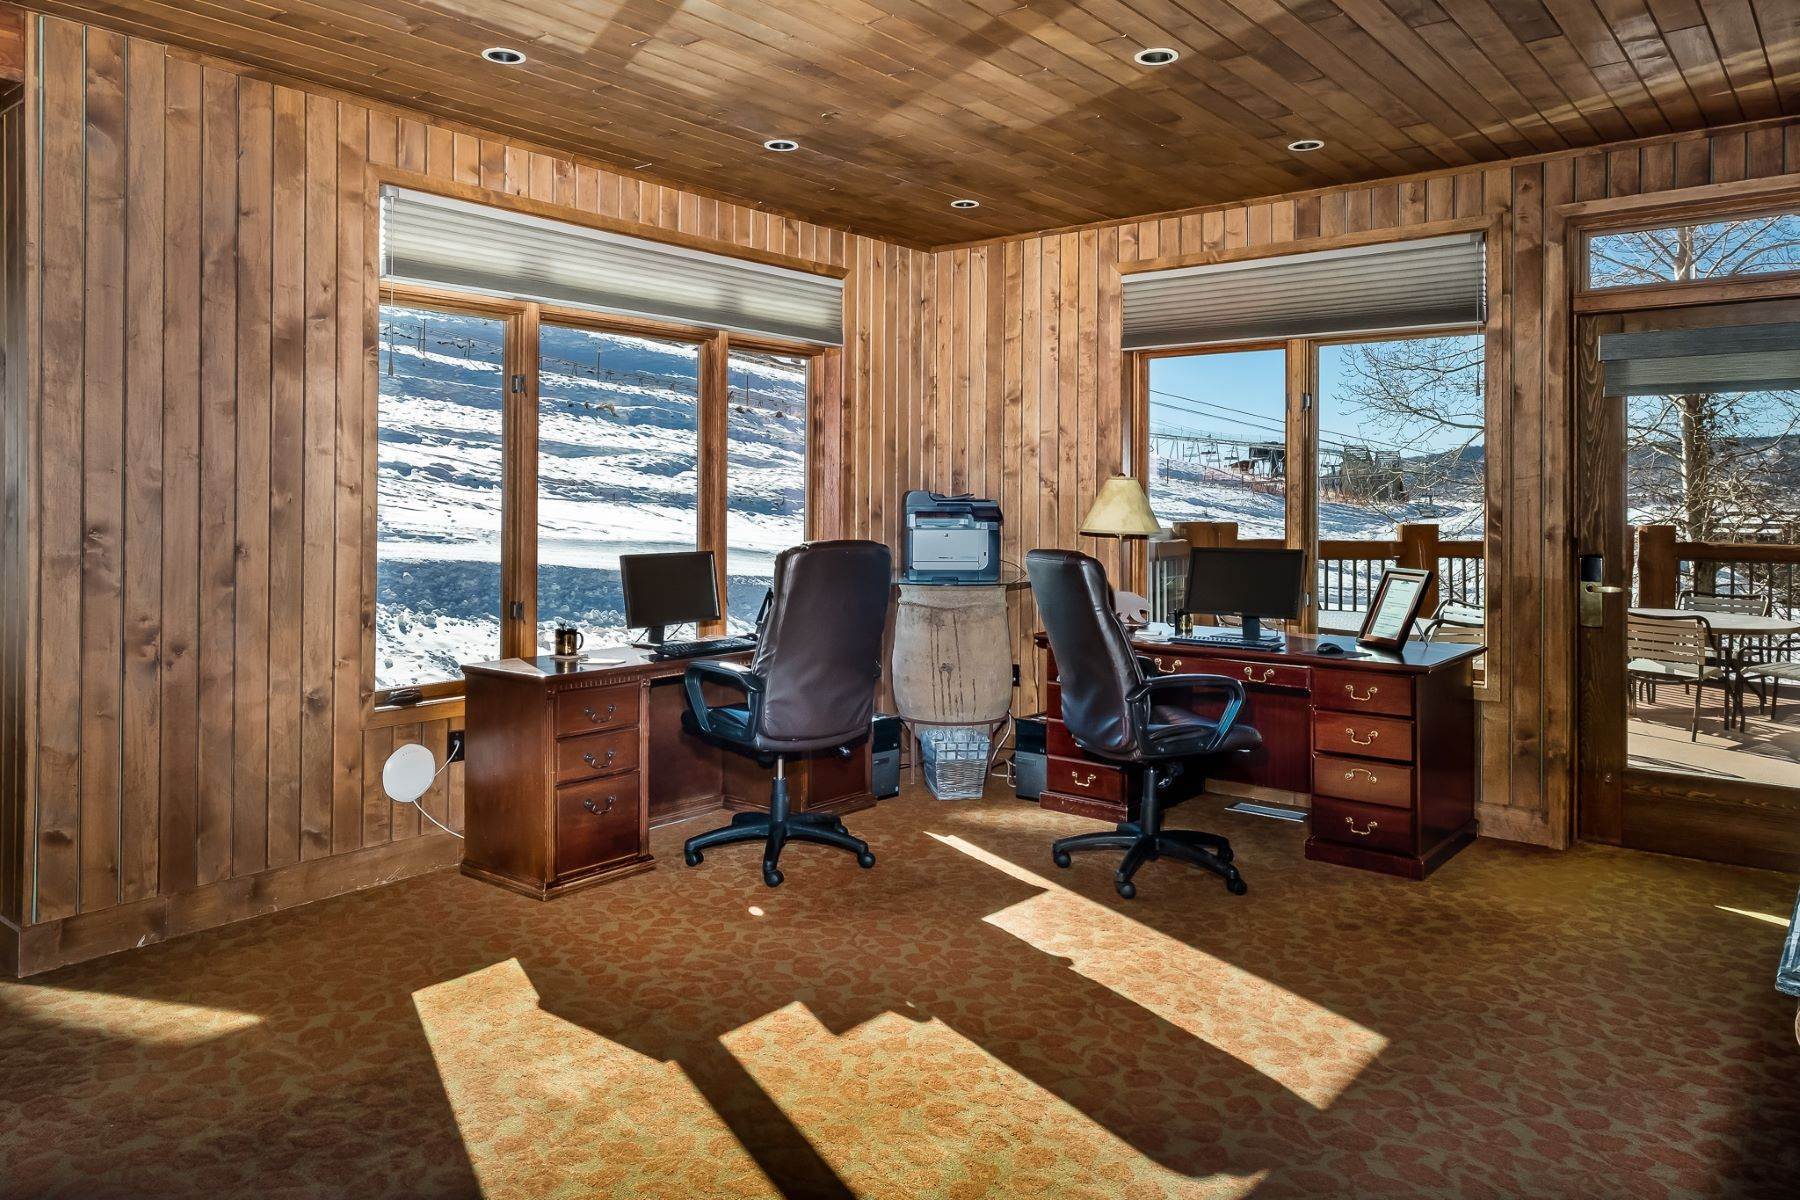 19. Fractional Ownership Property for Sale at Ski-in/Ski-Out Fractional Ownership at it's Finest 2255 Ski Time Square Drive, Unit# 213-3-82 Steamboat Springs, Colorado 80487 United States